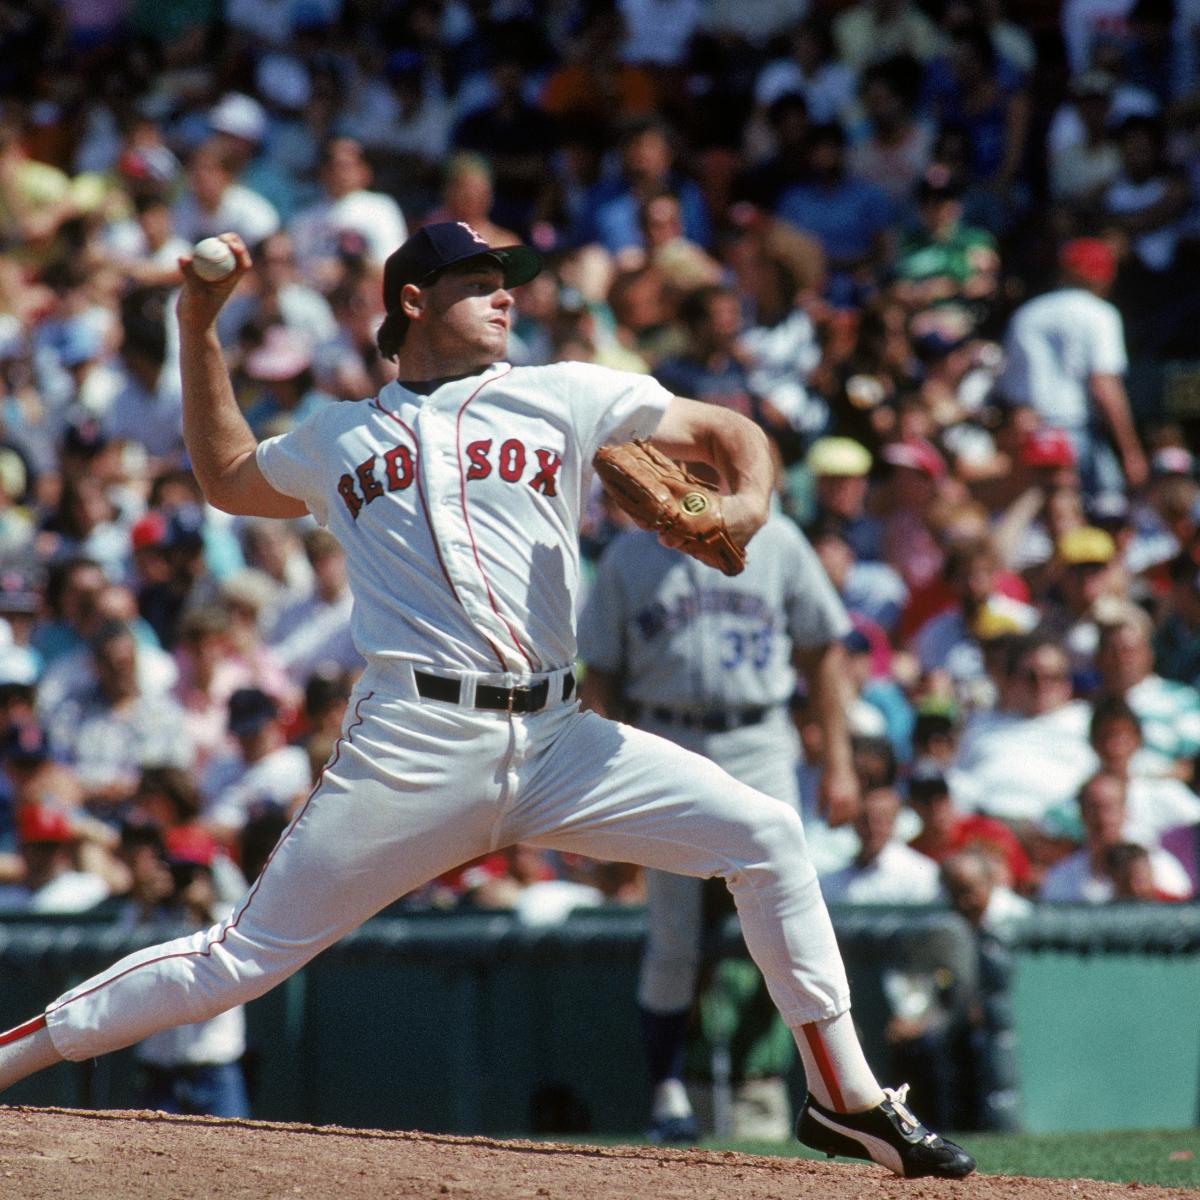 If Tom Seaver hadn't been hurt in 1986, Red Sox might have won